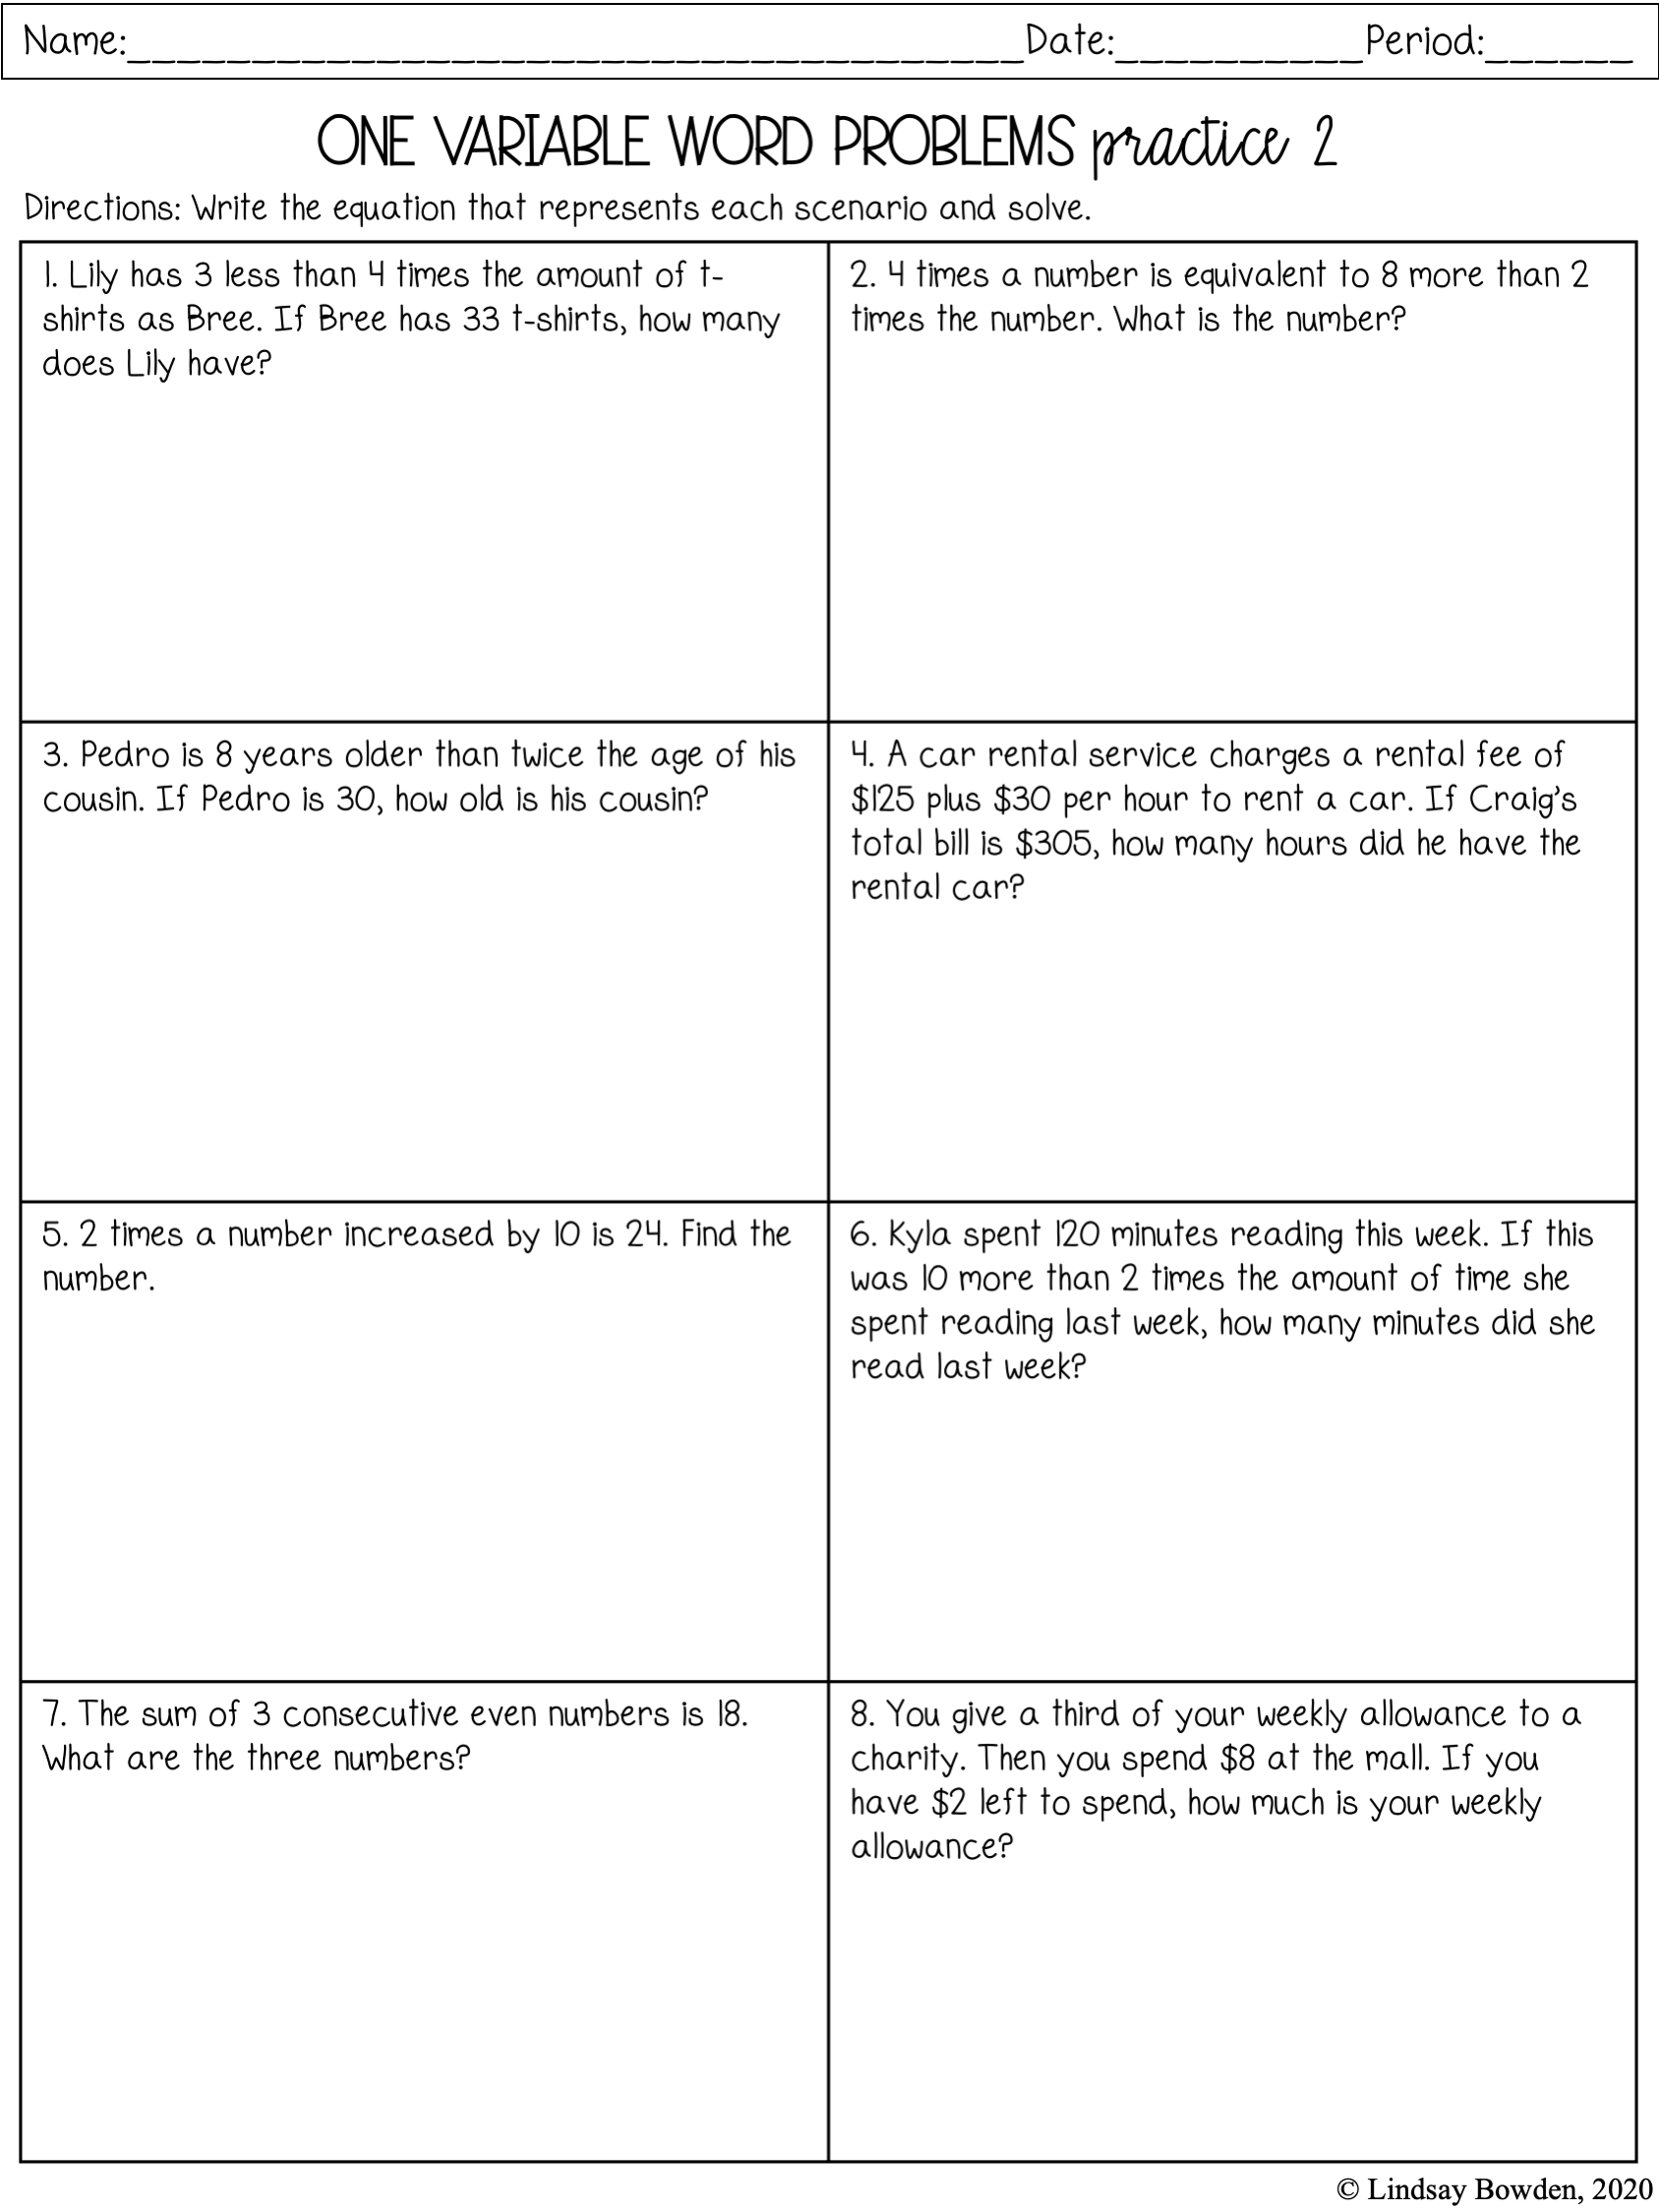 one-variable-word-problems-notes-and-worksheets-lindsay-bowden